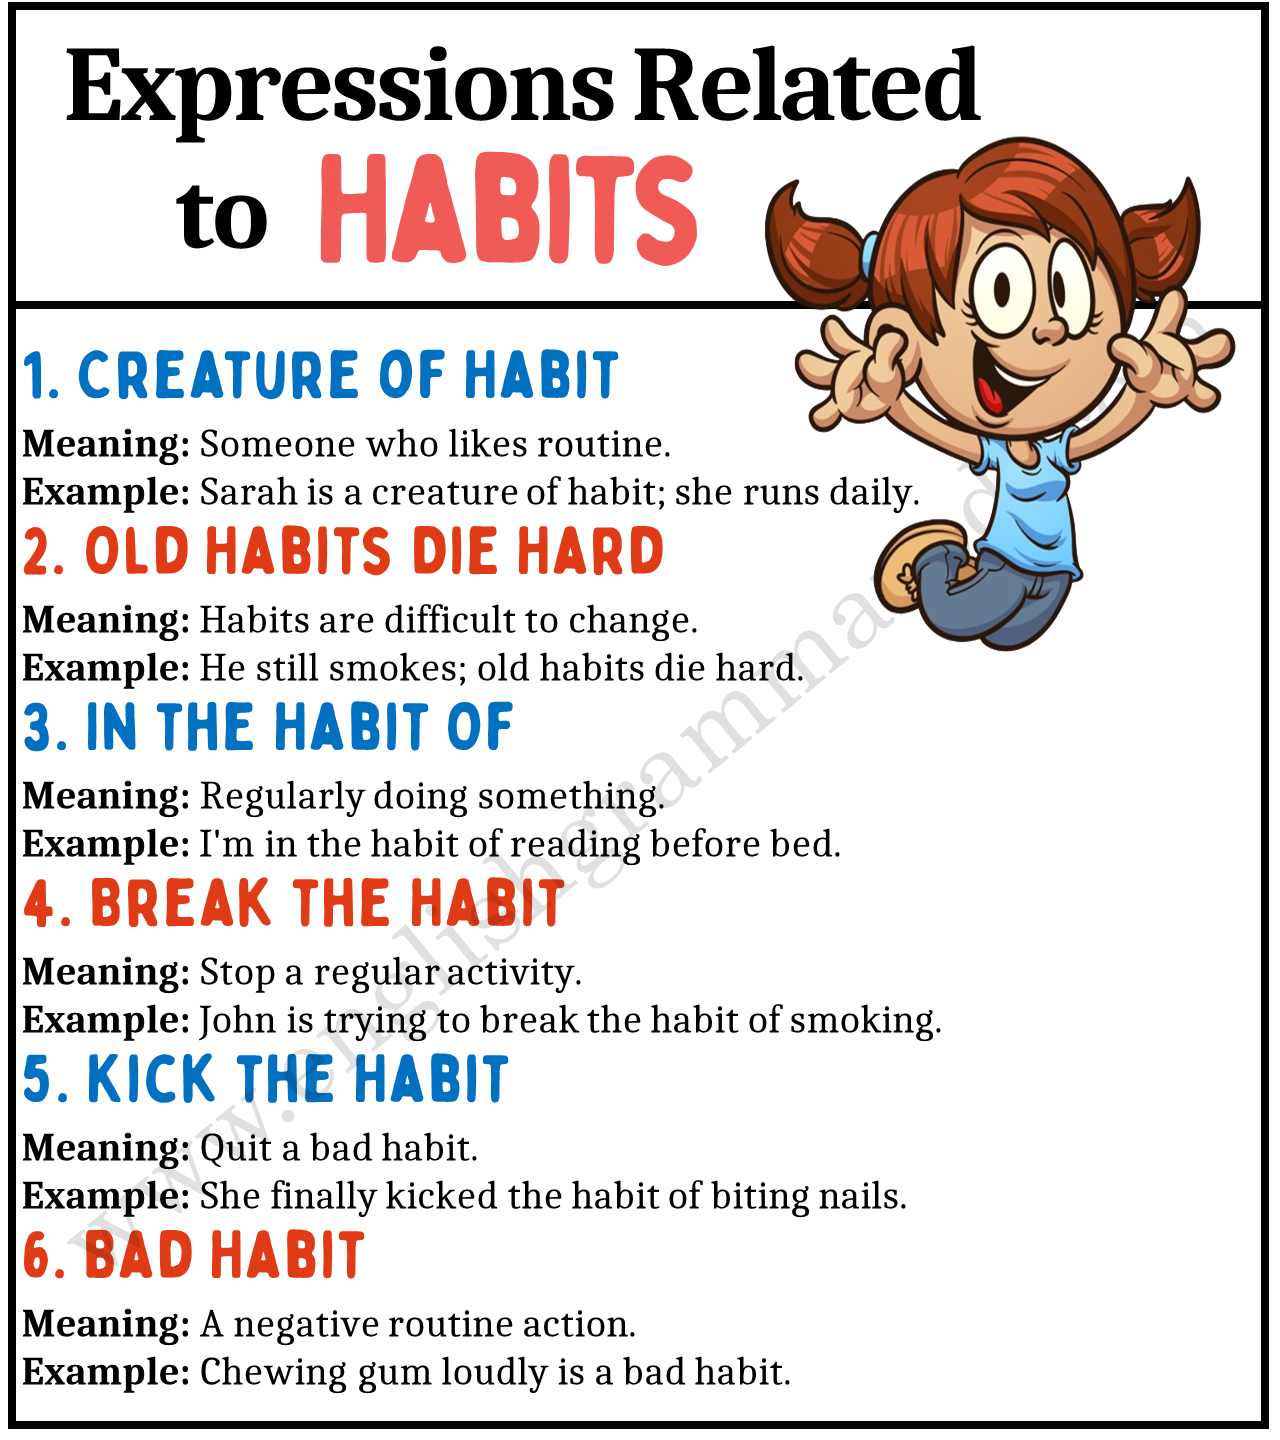 Expressions Related to Habits